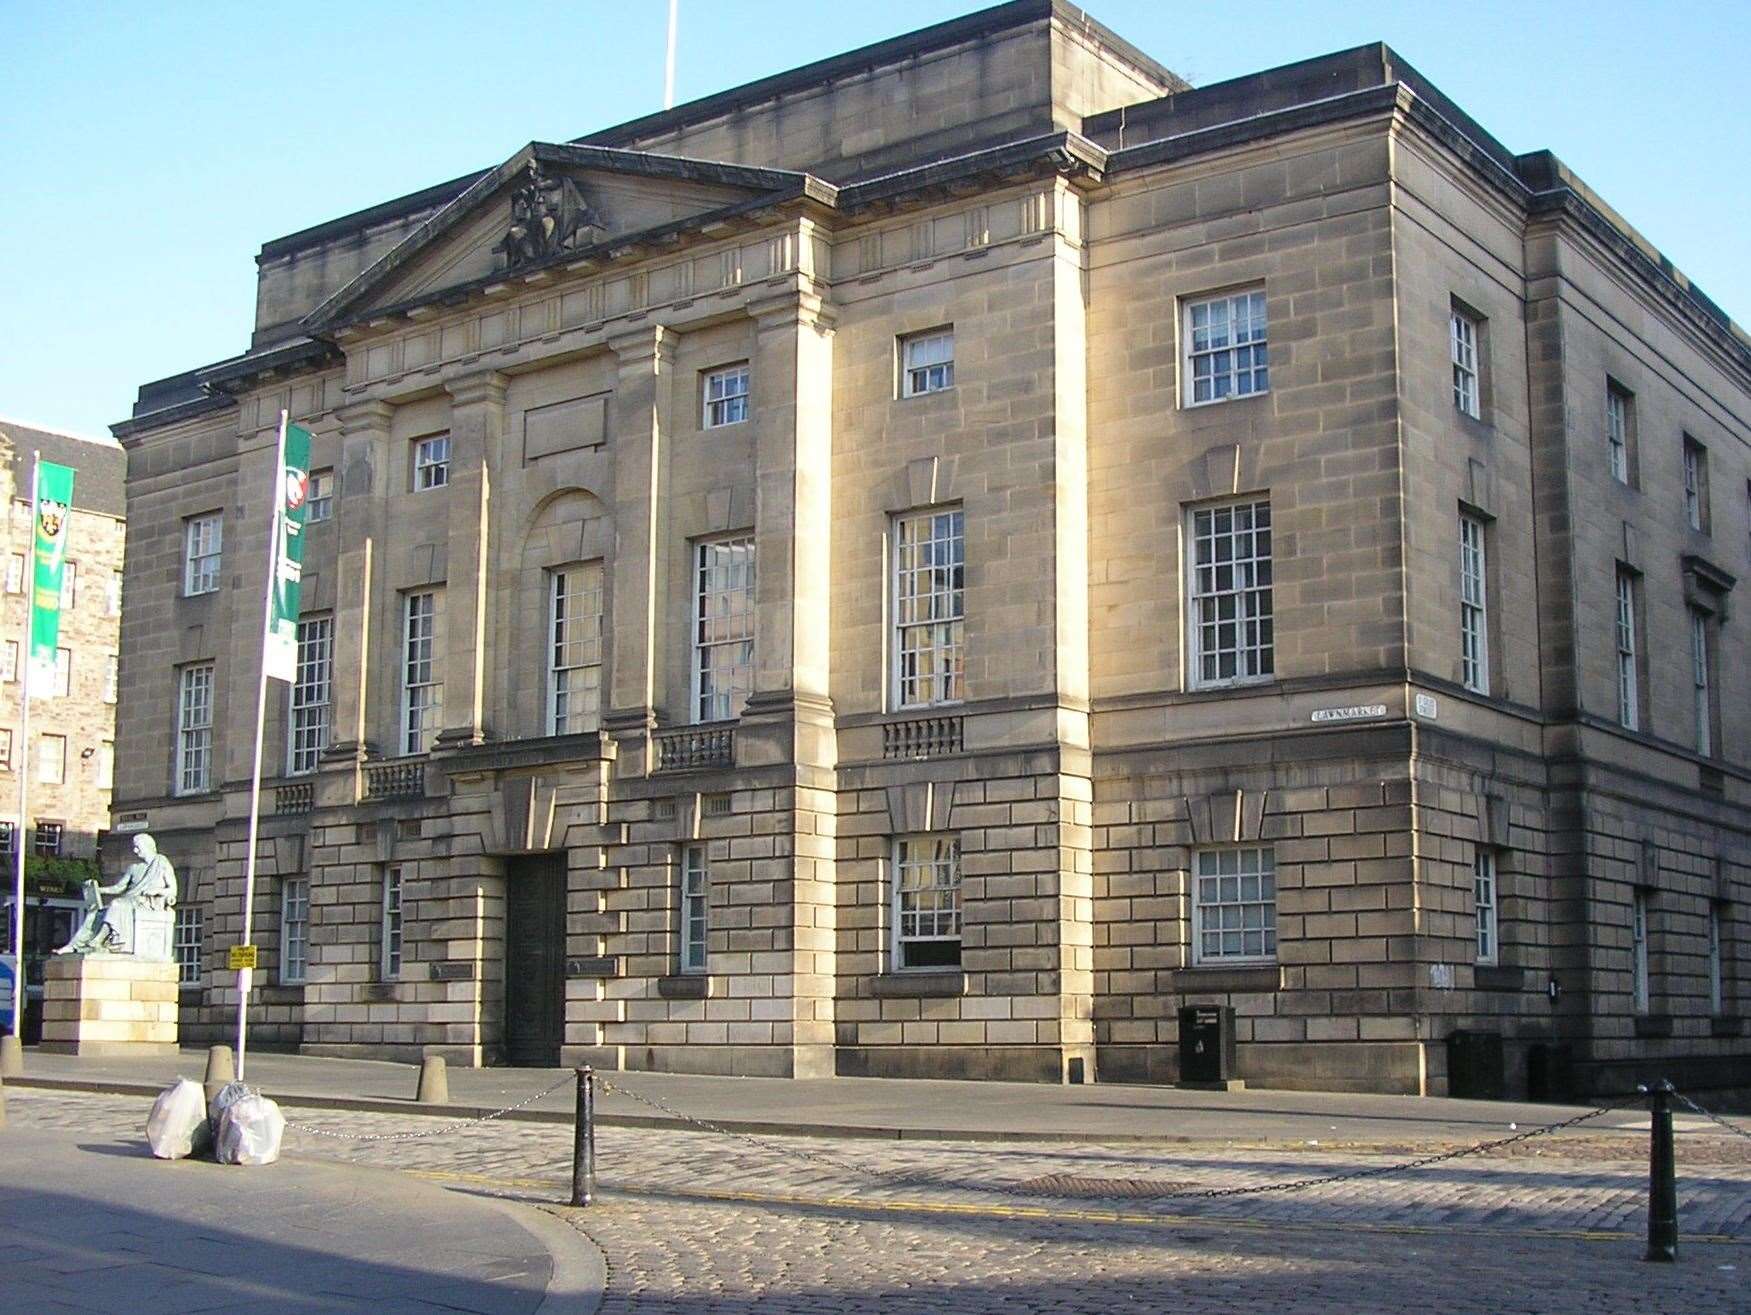 The High Court building in Edinburgh, where the Court of Criminal Appeal rejected the appeal on Friday.